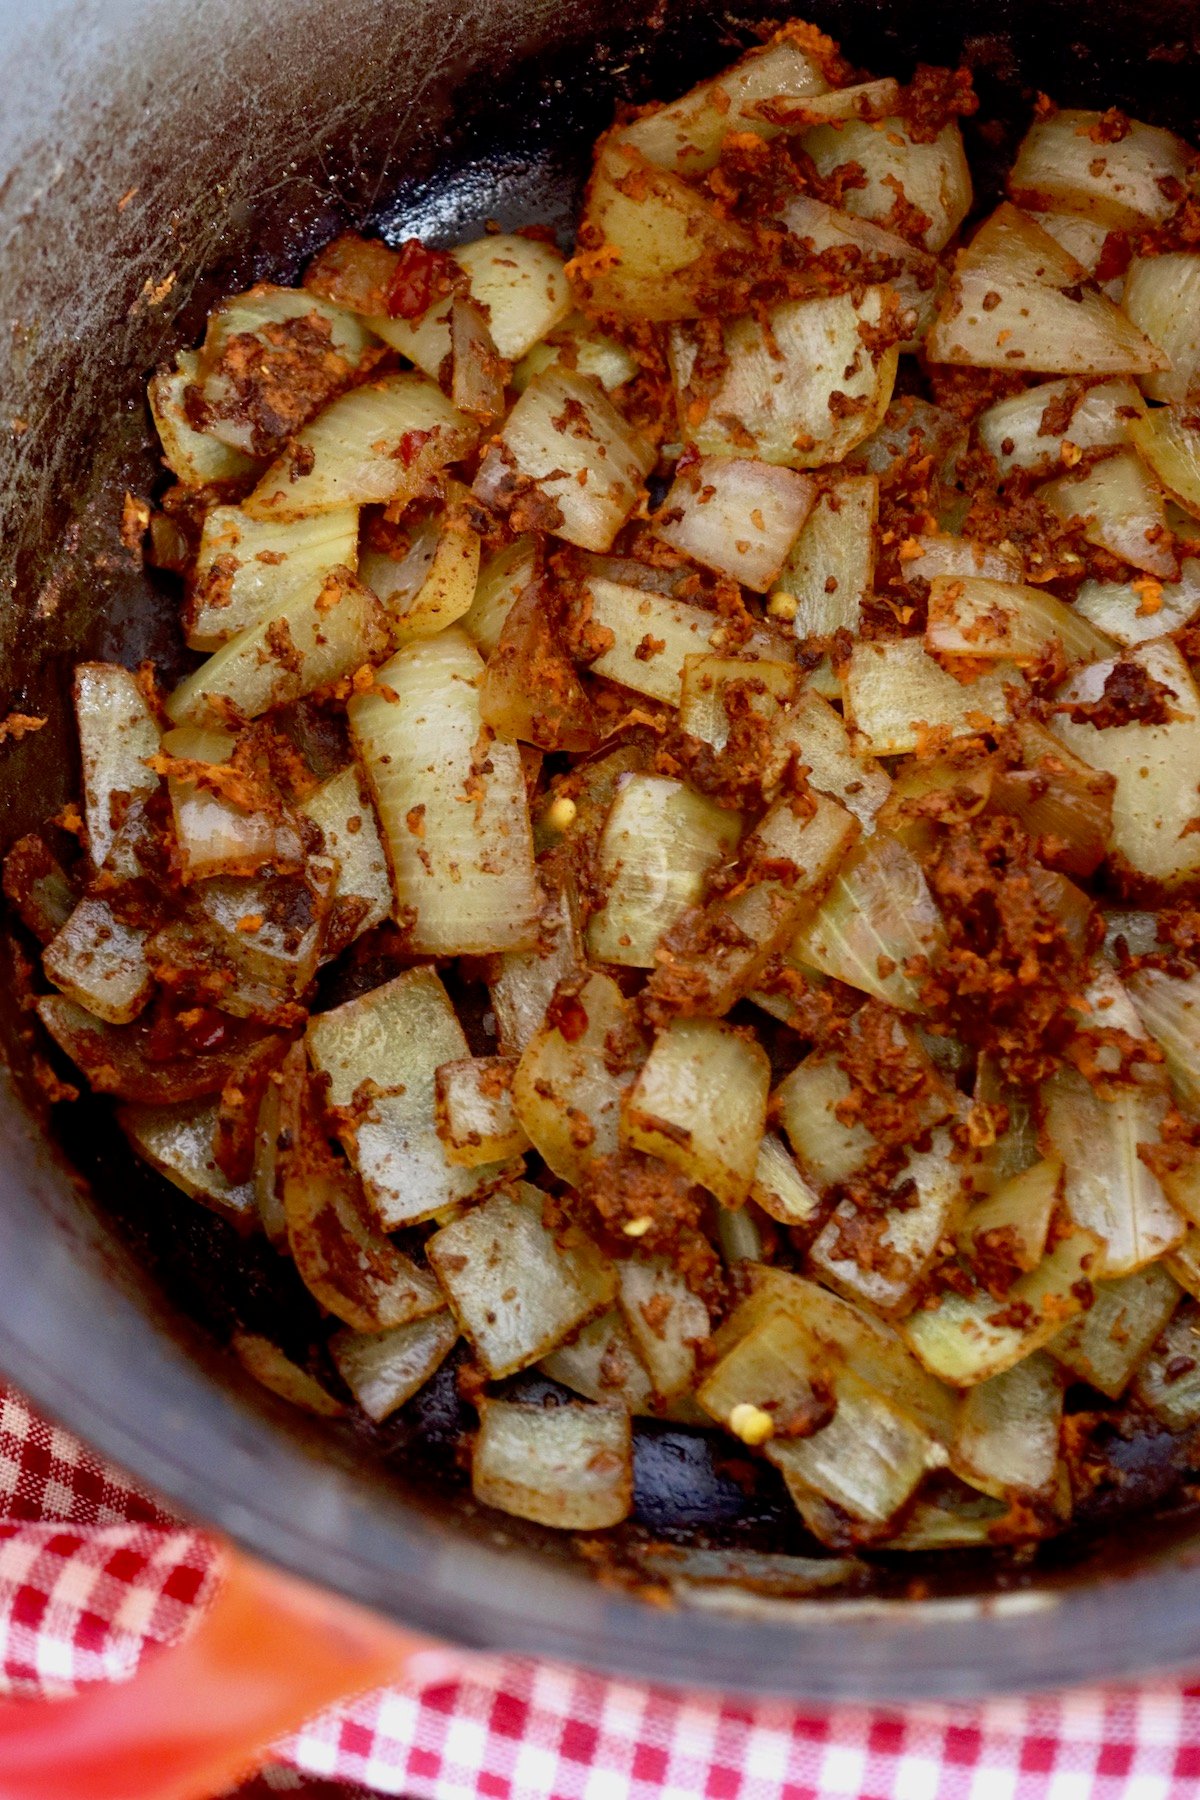 Dutch oven with sauteed onions and spices.